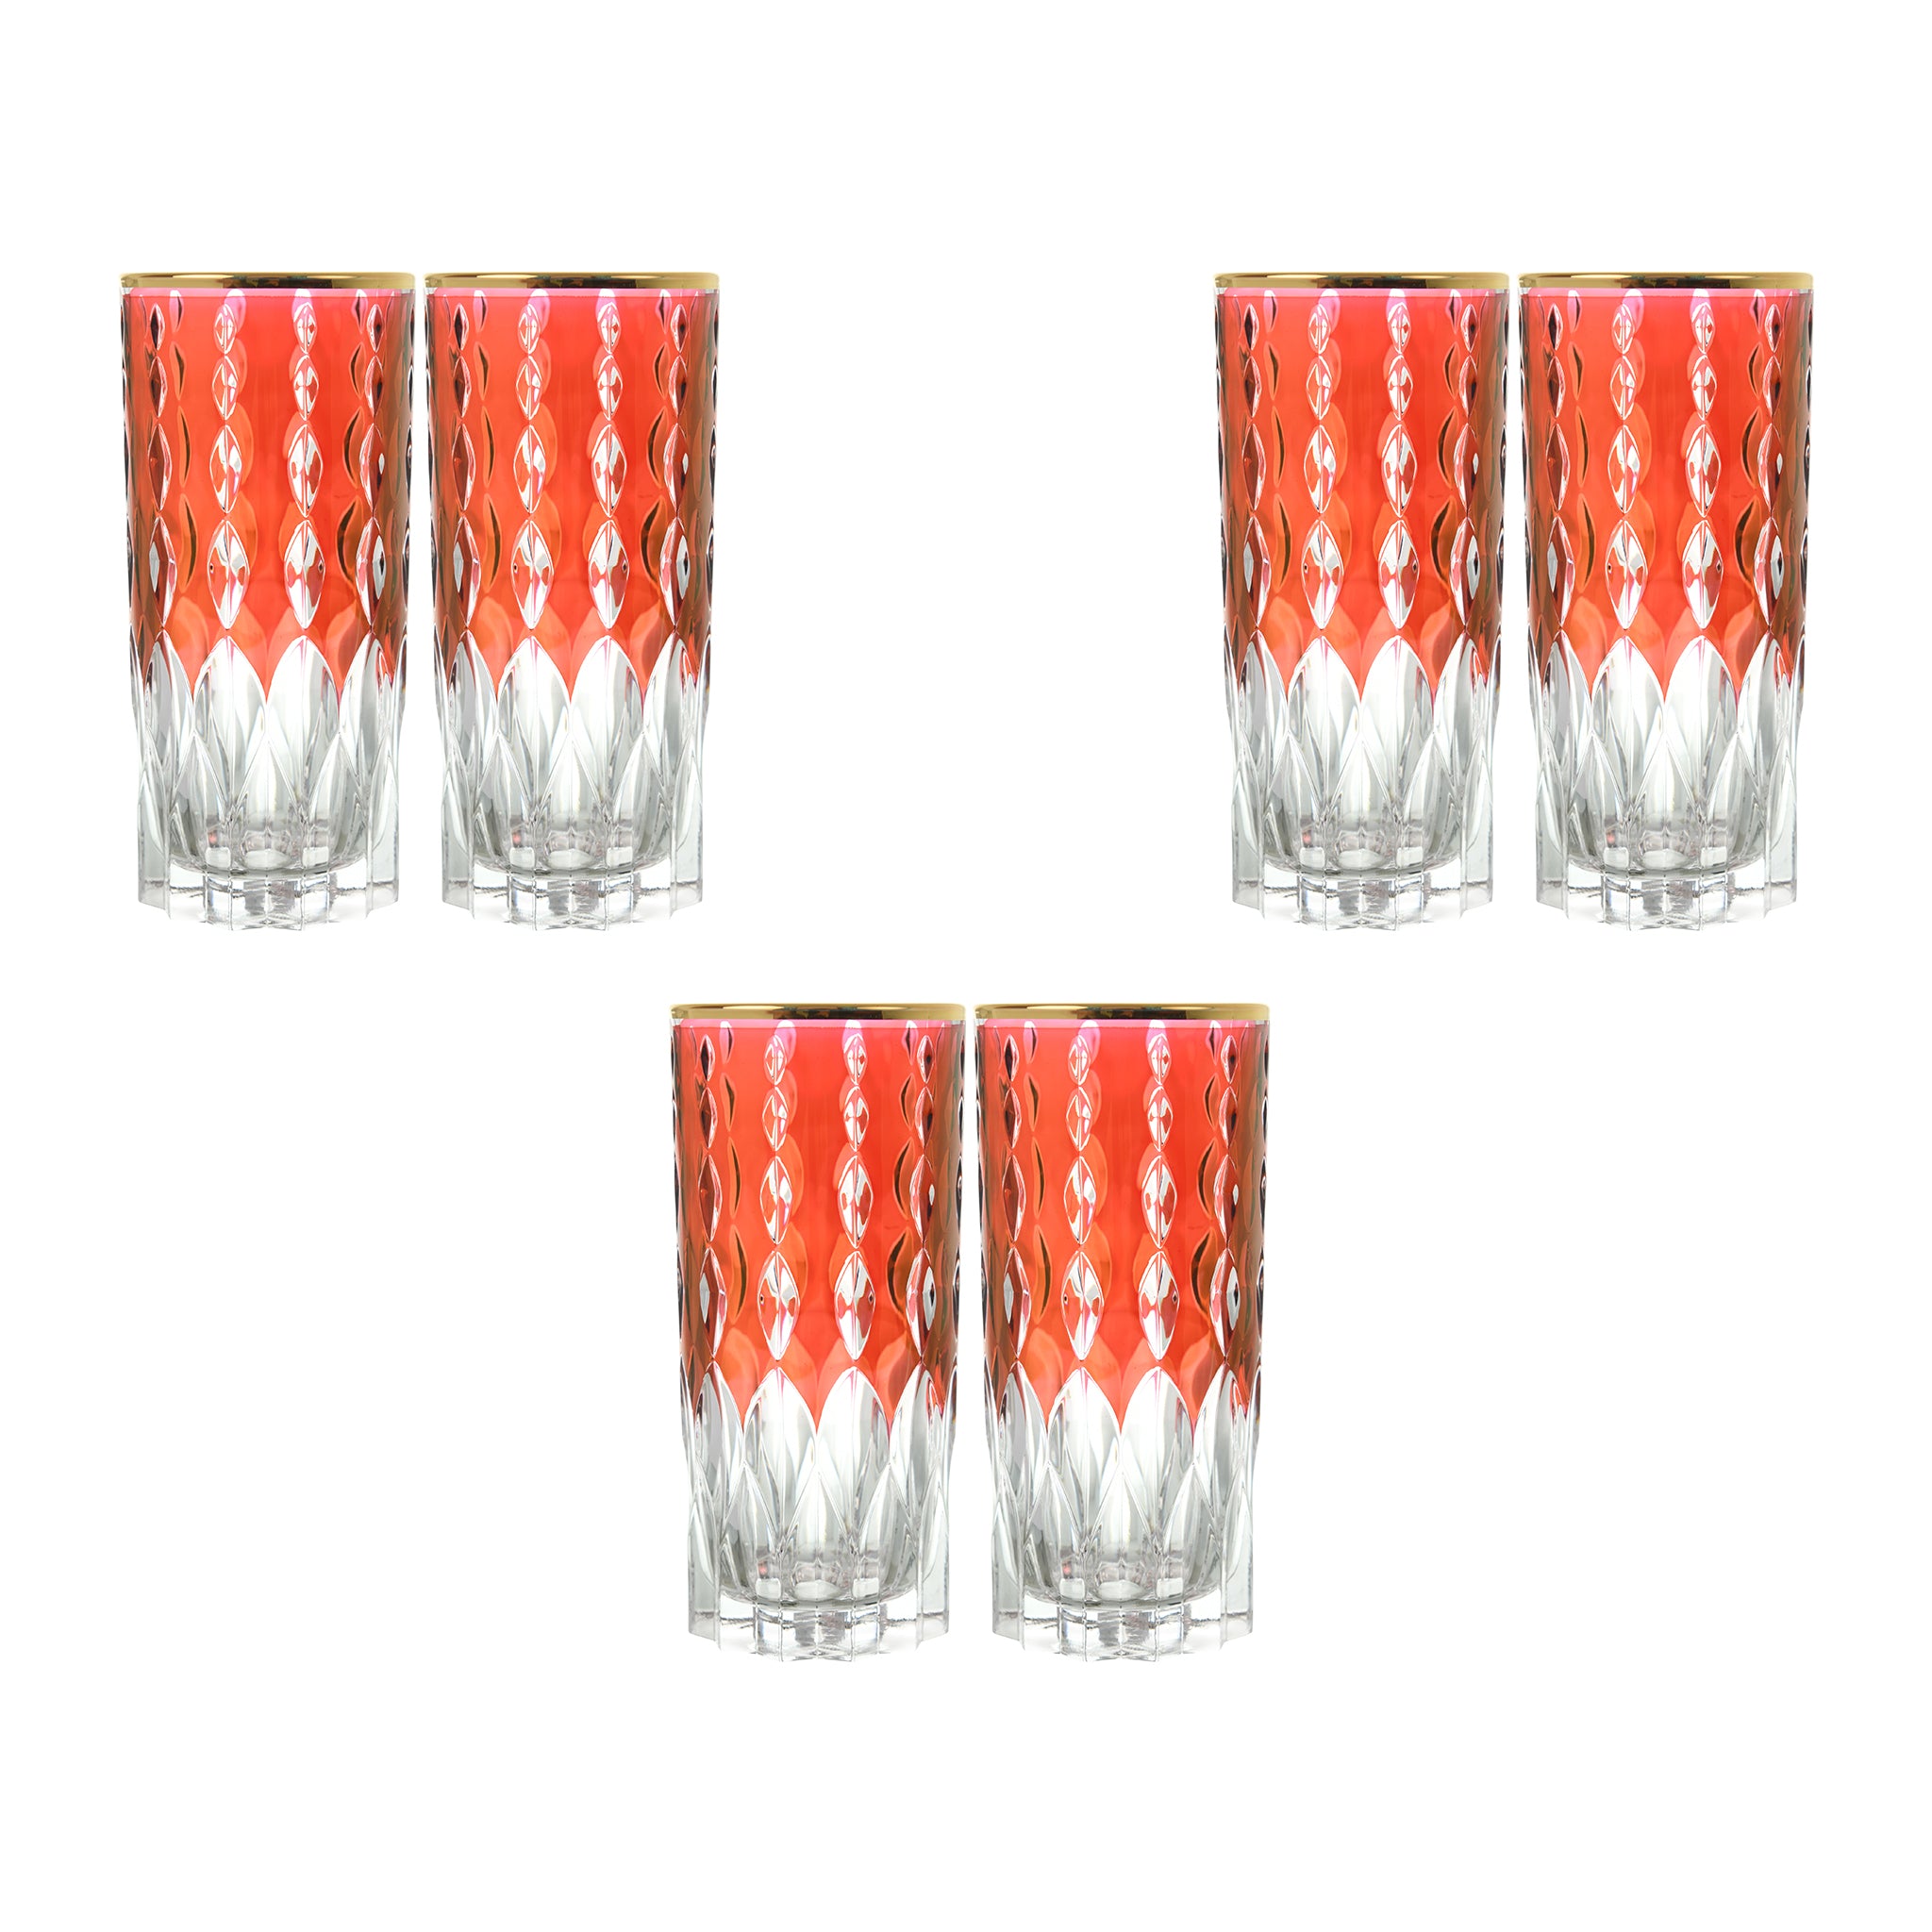 RCR Italy - Highball Glass Set 6 Pieces - Red & Gold - 360ml - 380003157